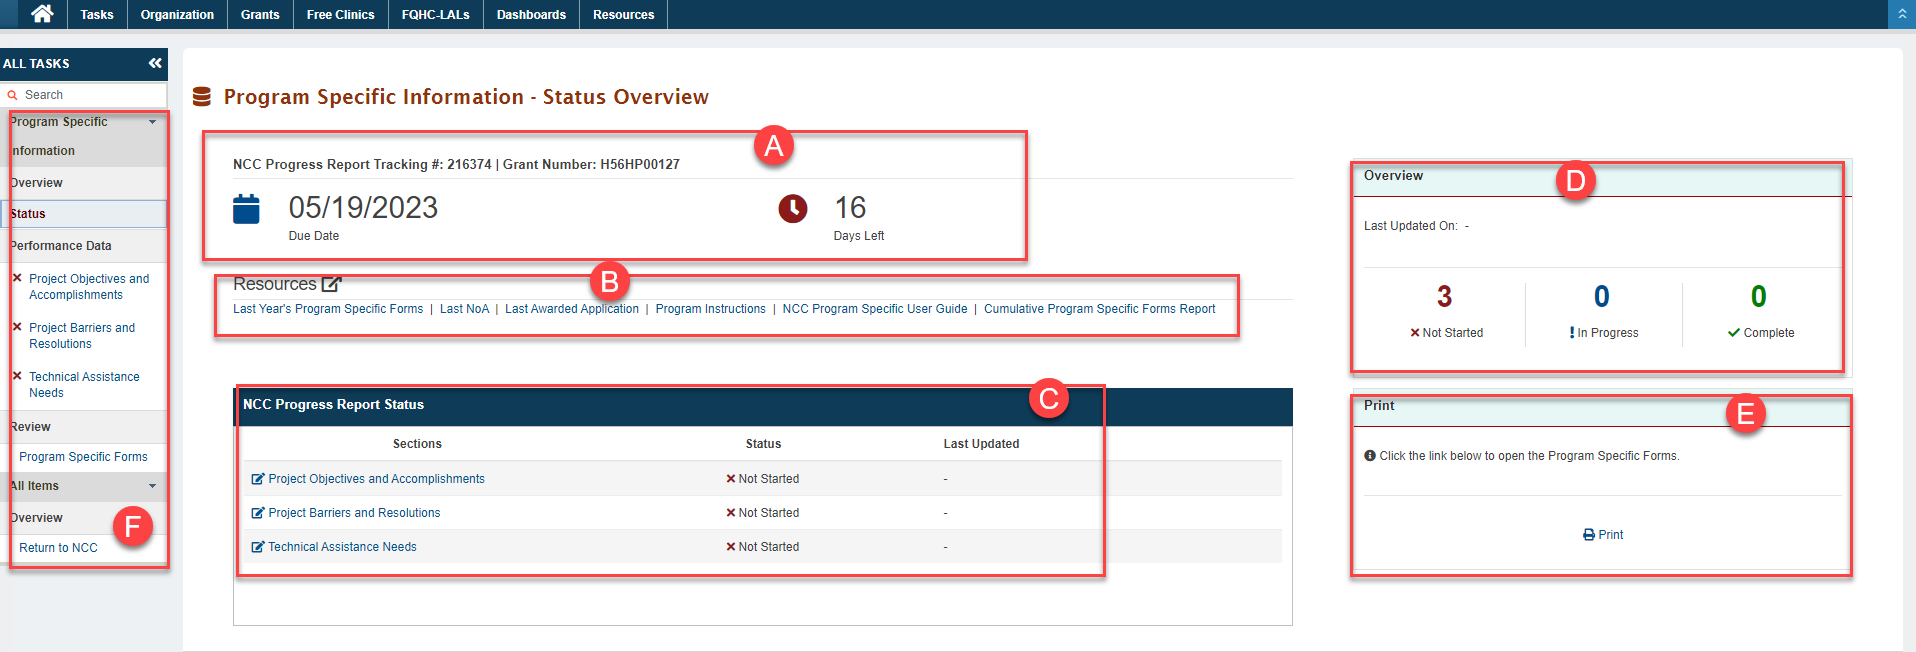 Screenshot of Program specific information status overview page